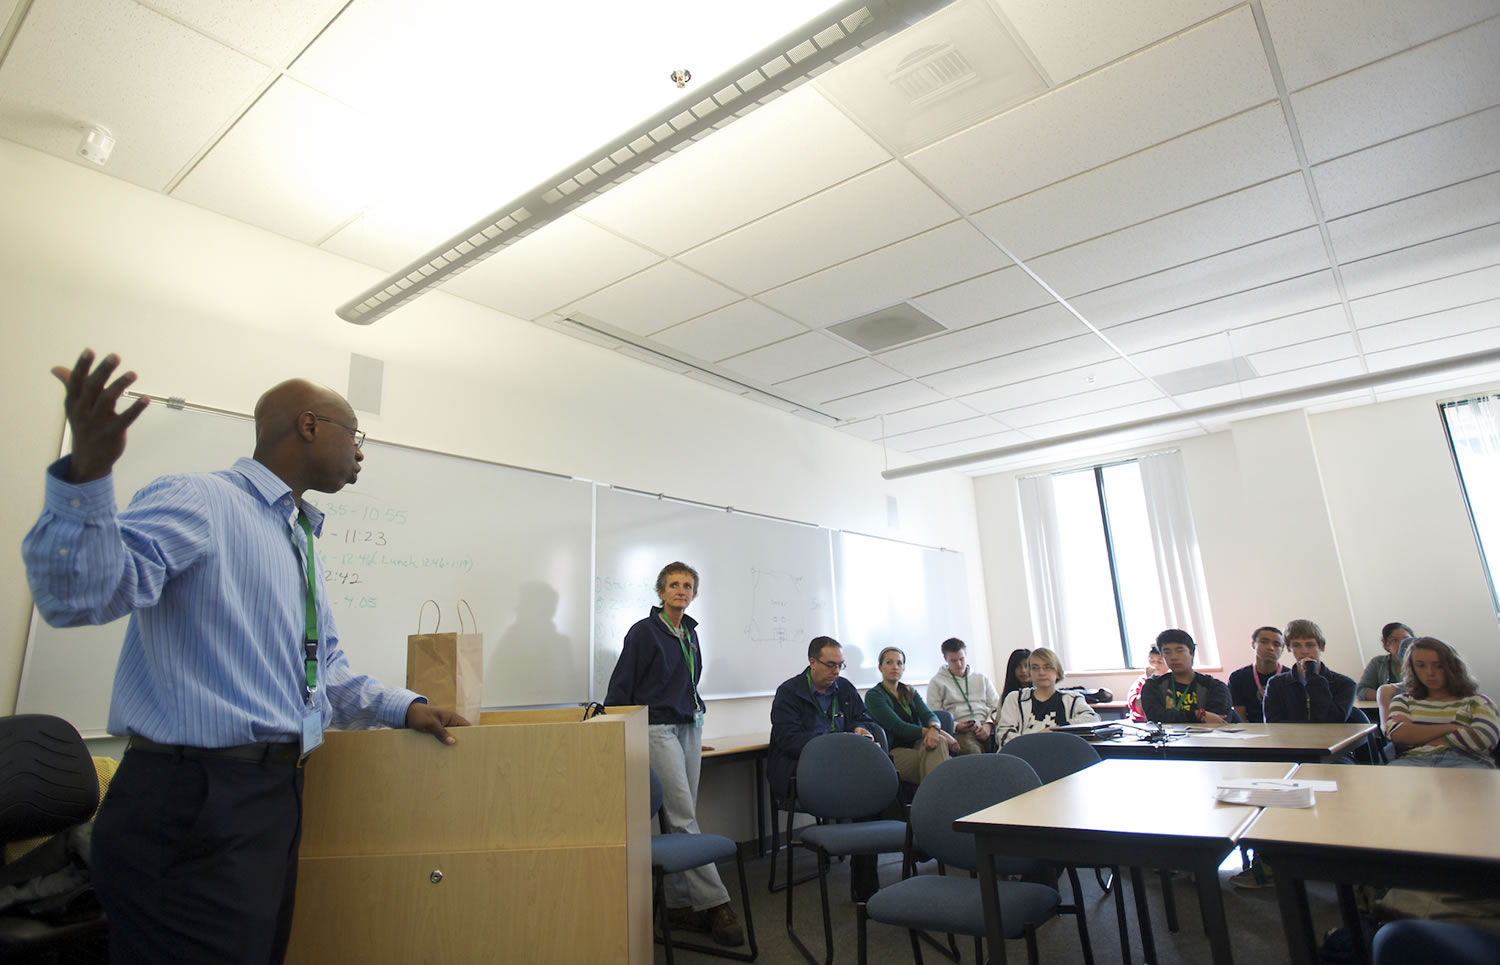 Bonneville Power Administration electrical engineer Ayo Idowu talks to a group of ninth-graders at Vancouver iTech Preparatory in October 2012 about a career in engineering with the BPA.